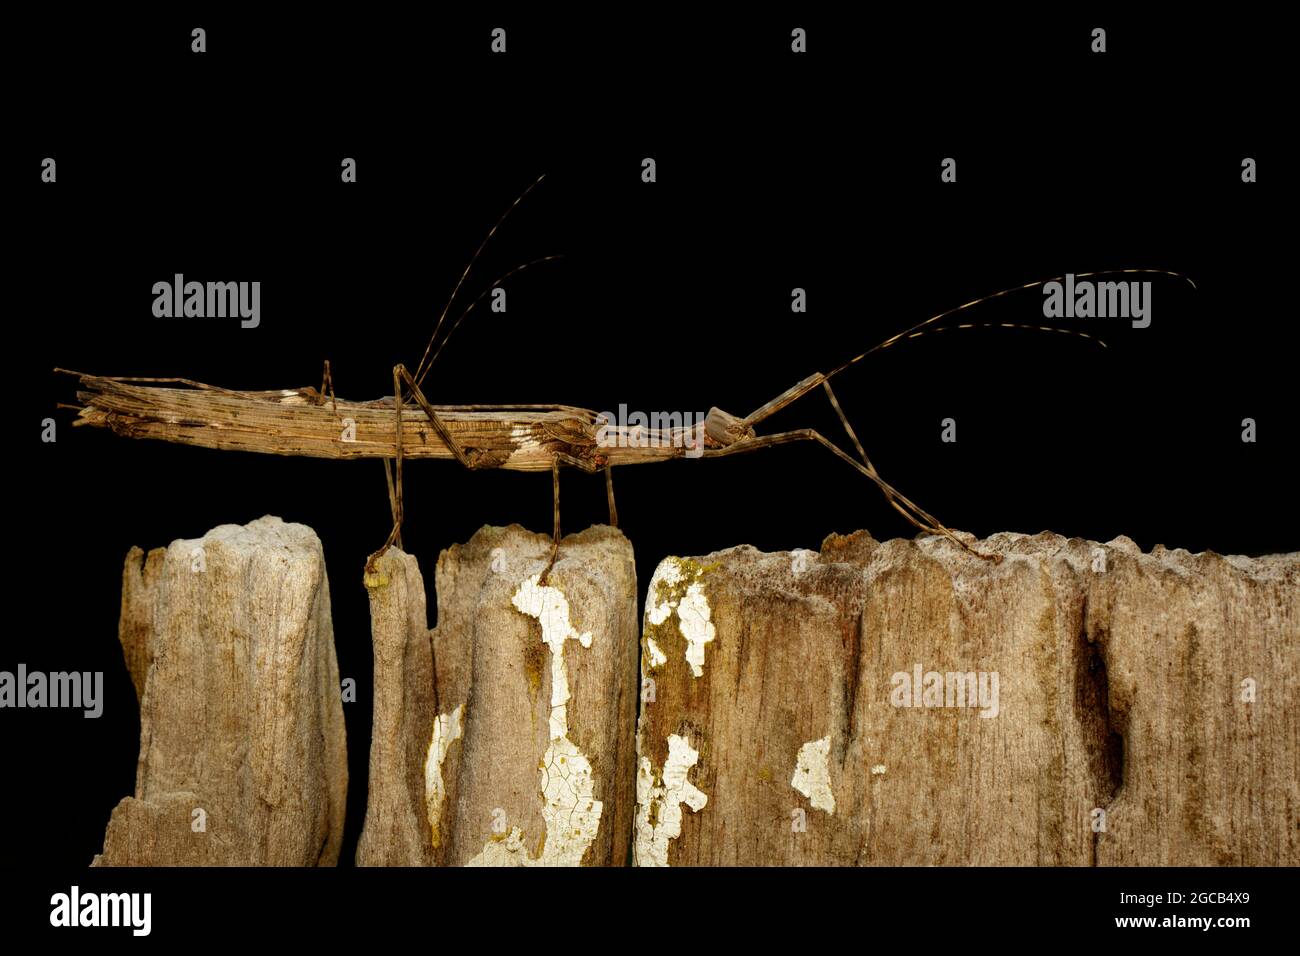 Image of a siam giant stick insect and stick insect baby on dried stump. Insect Animal. Stock Photo